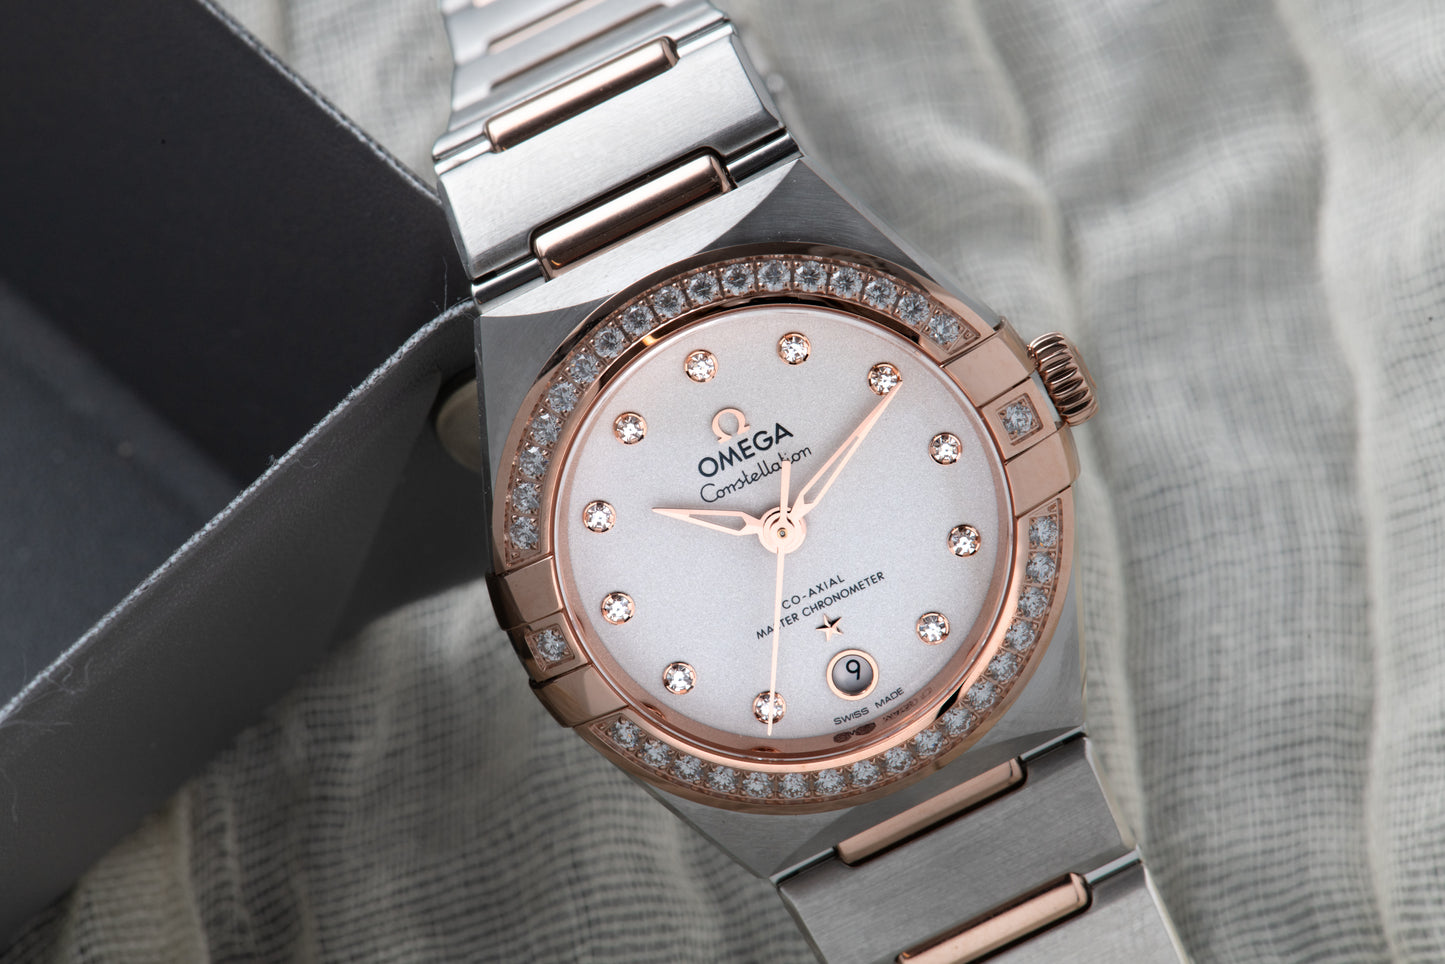 Omega Constellation Two-Tone Sedna Gold & Steel